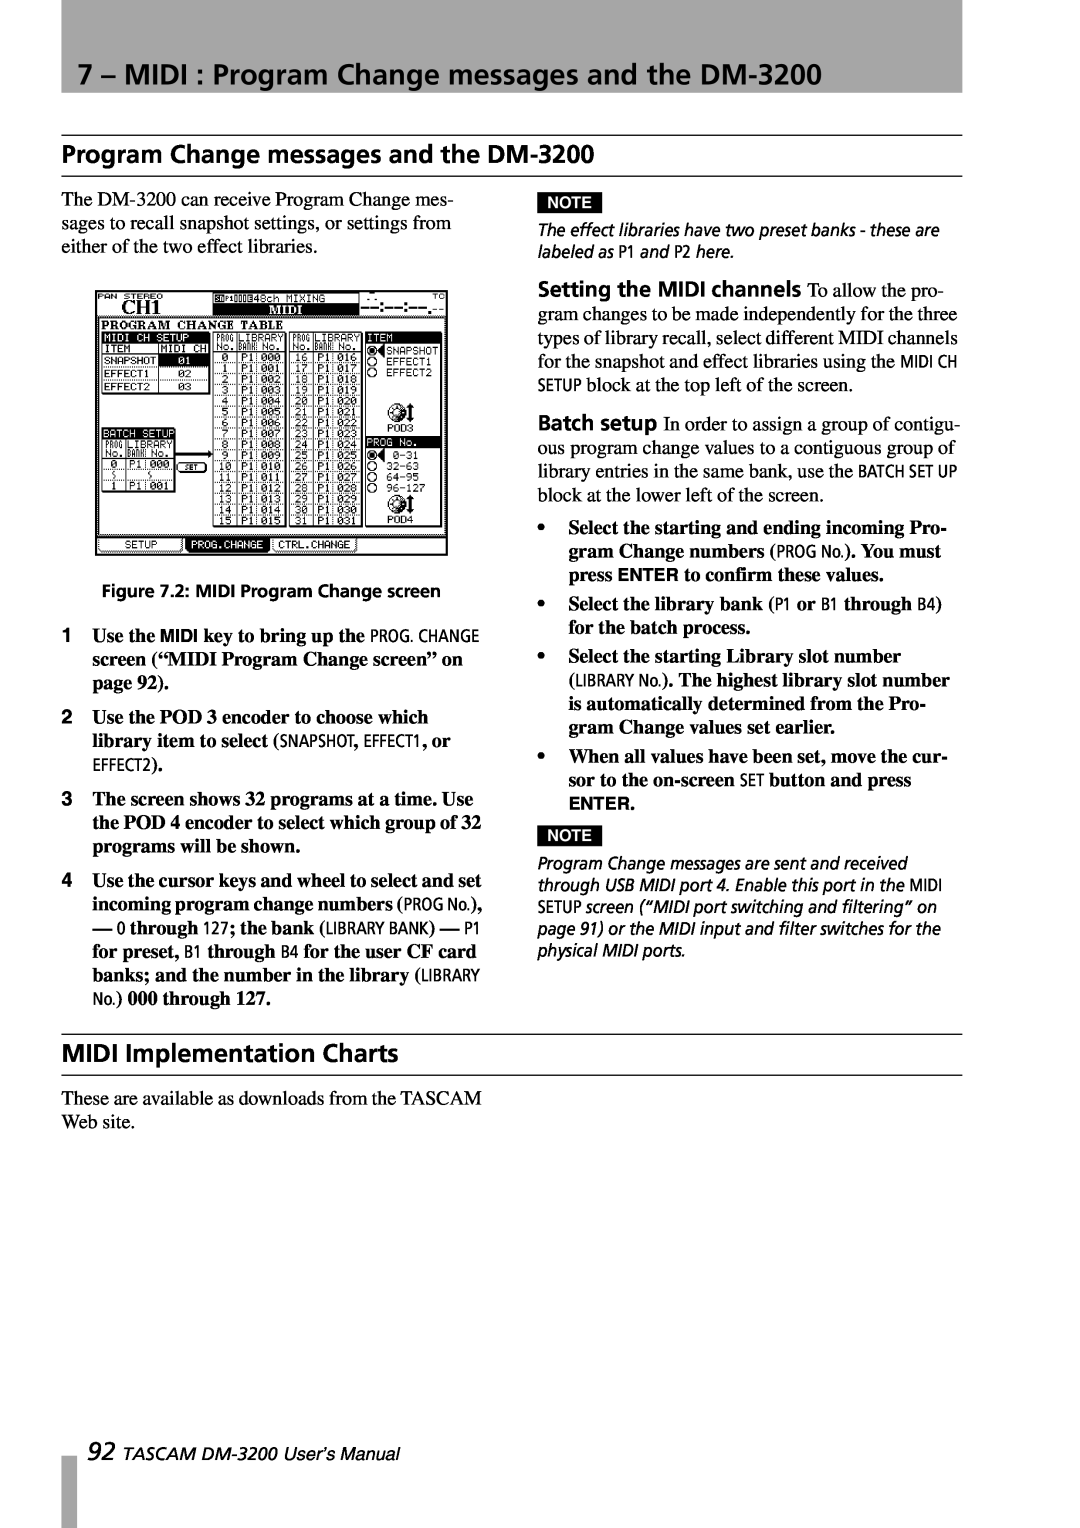 Tascam owner manual Program Change messages and the DM-3200, MIDI Implementation Charts 